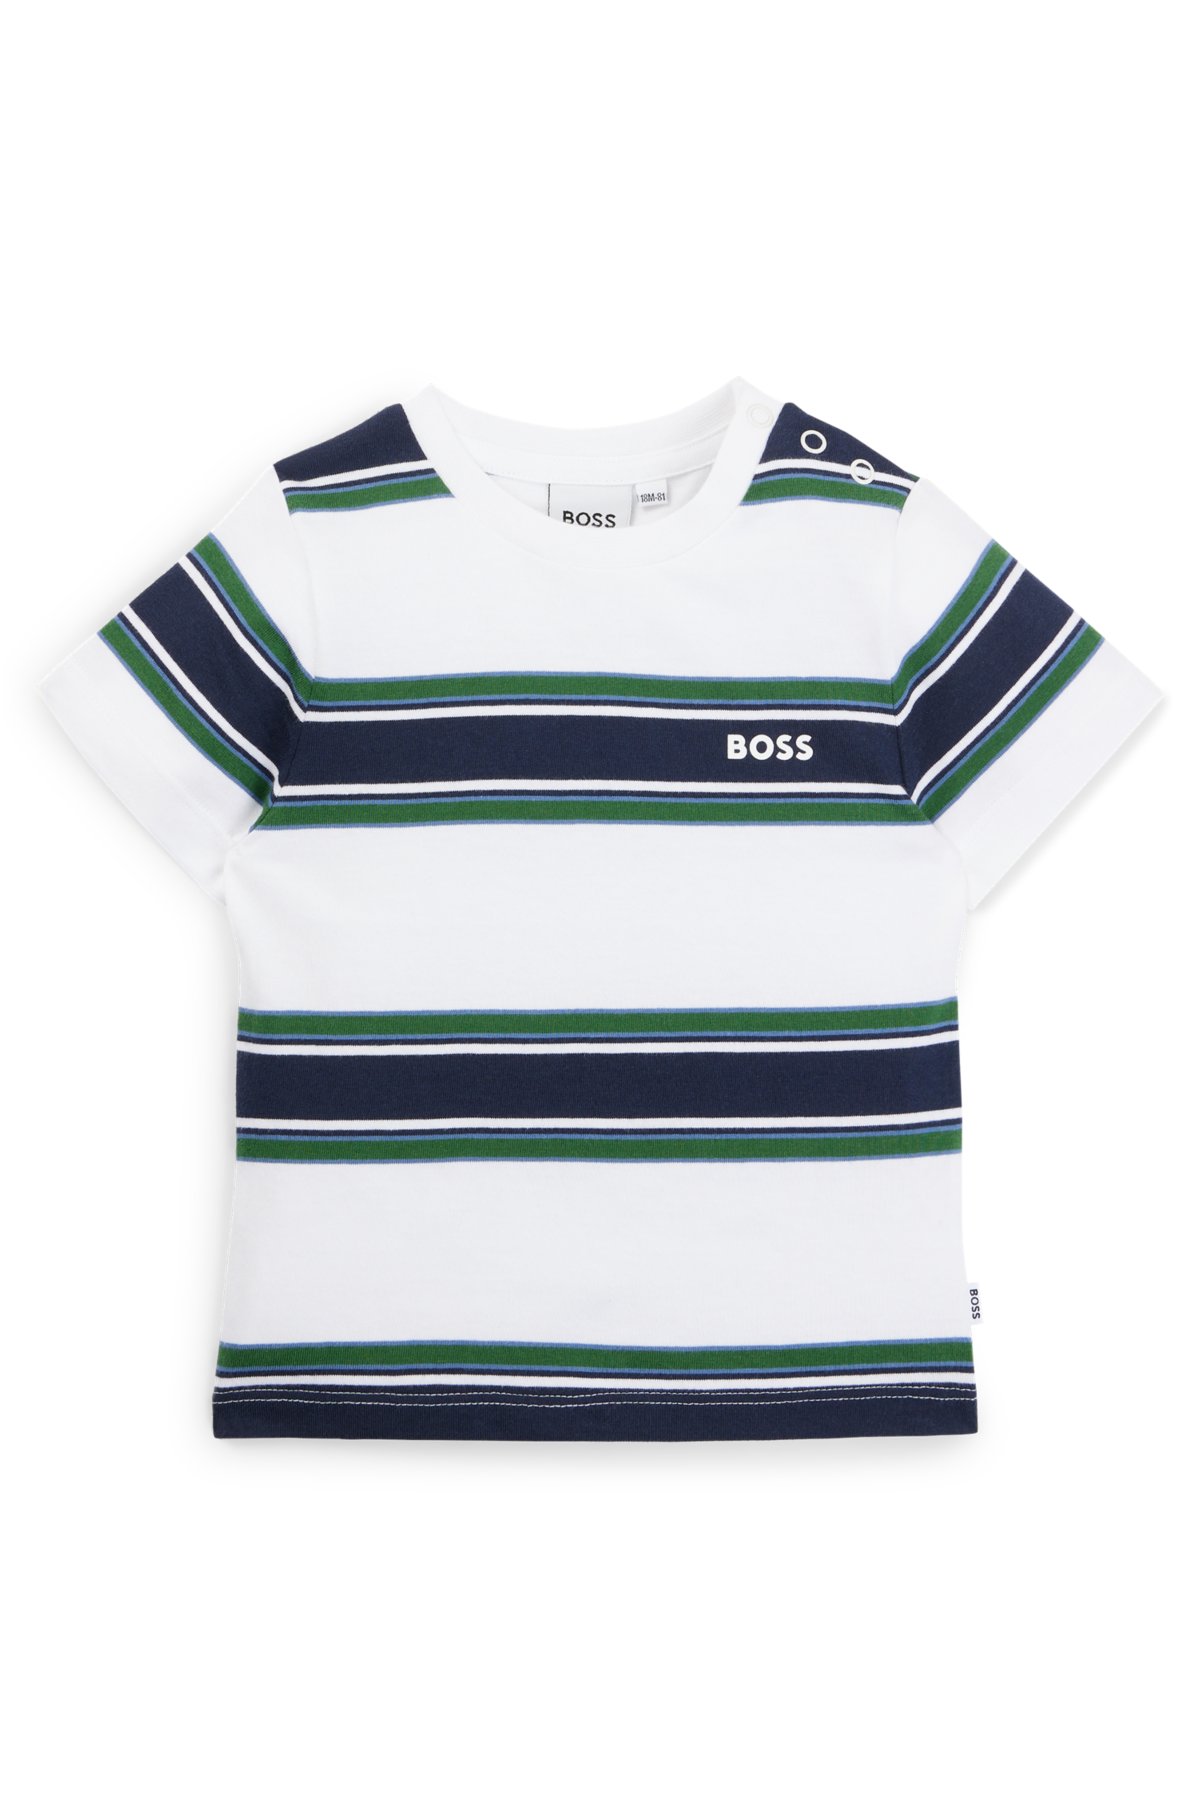 Kids' T-shirt in cotton jersey with stripes and logo, Patterned